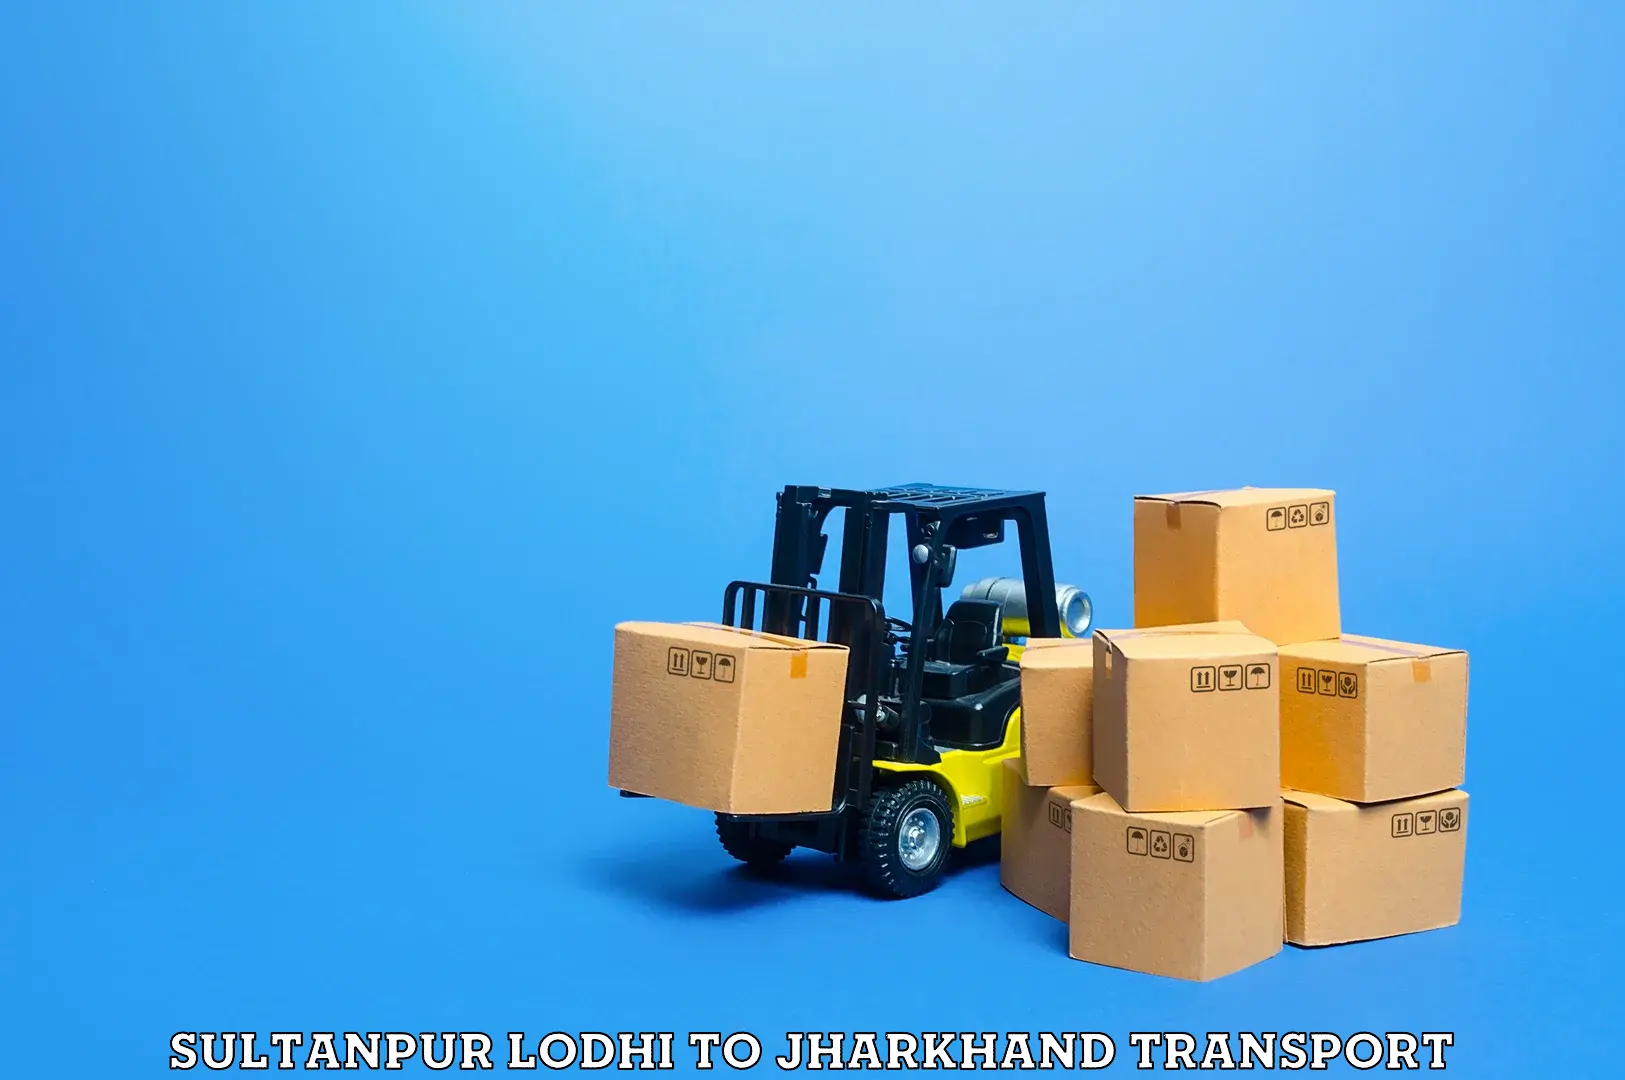 Cargo train transport services in Sultanpur Lodhi to Bokaro Steel City